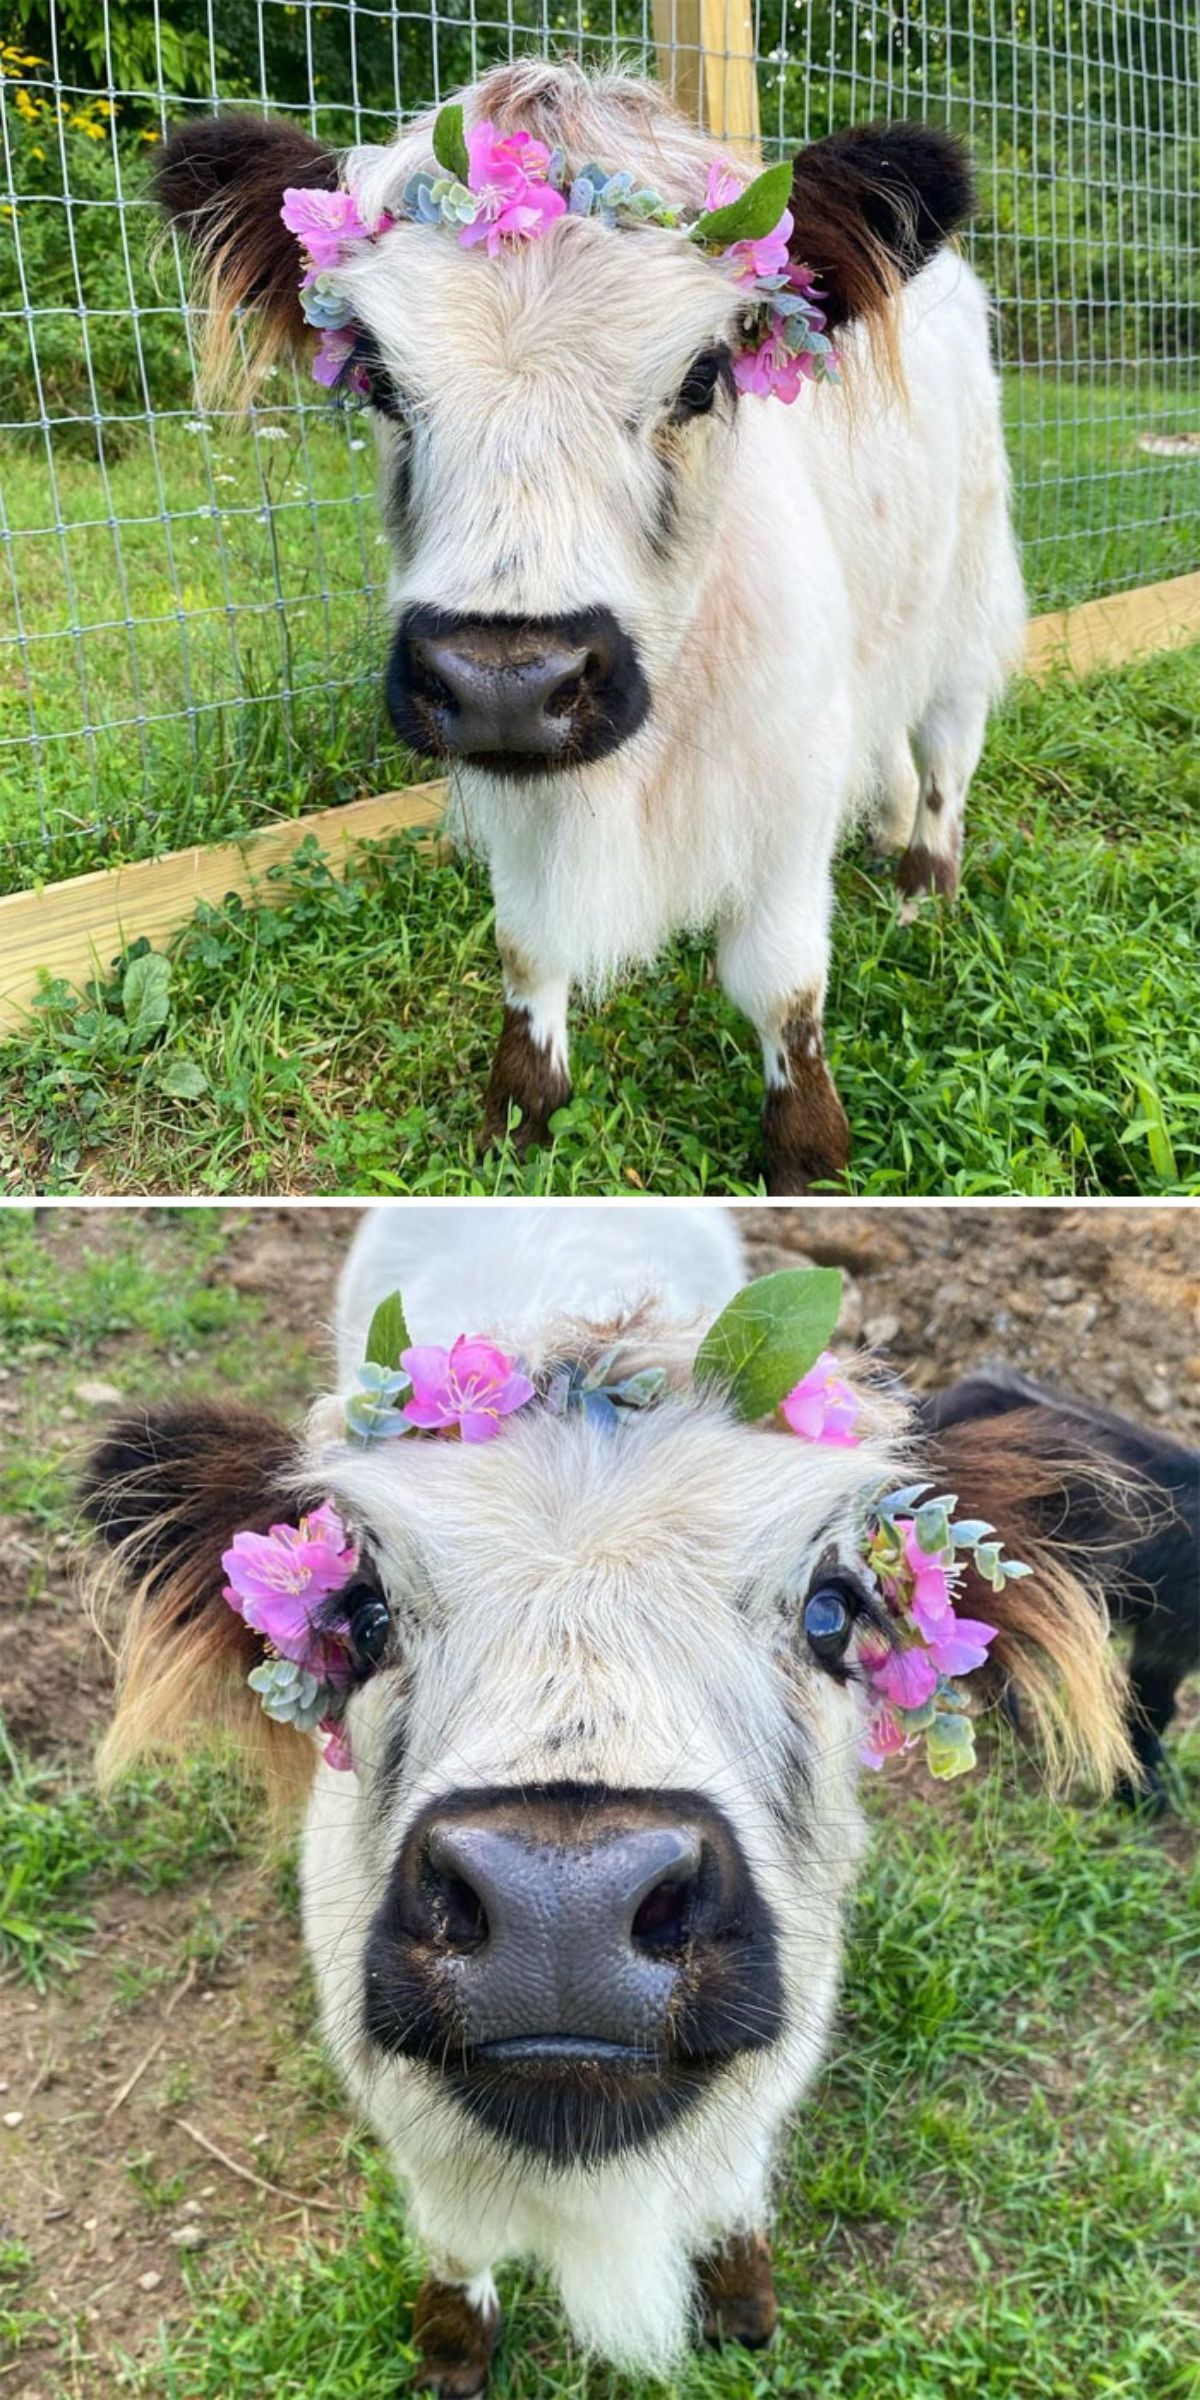 2 photos of a white and brown calf with a colourful flower garland on the head standing on grass